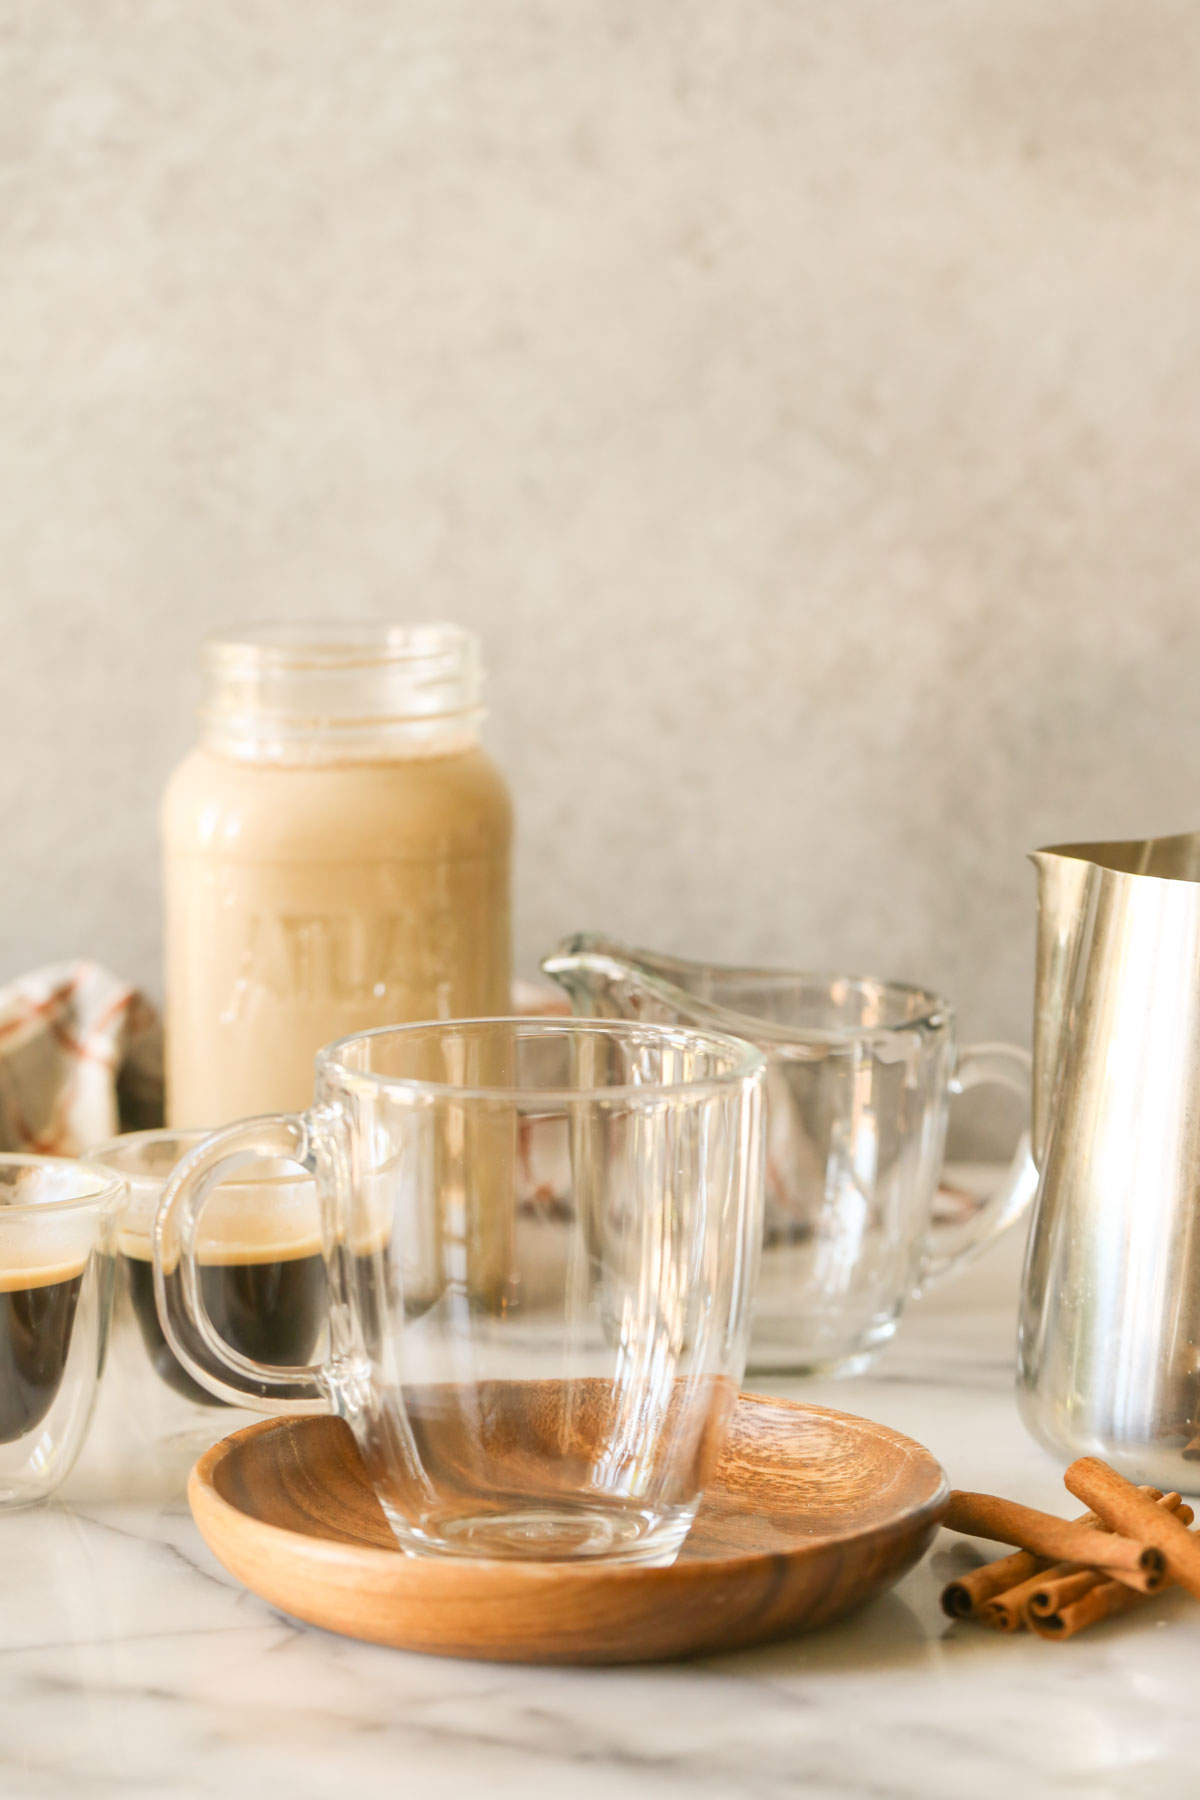 A glass mug on a wood saucer with cinnamon sticks next to it, espresso shots in the background, along with a glass jar of Brown Sugar and Cinnamon Coffee Creamer, a glass pouring mug and a stainless steel pitcher of steamed milk.  